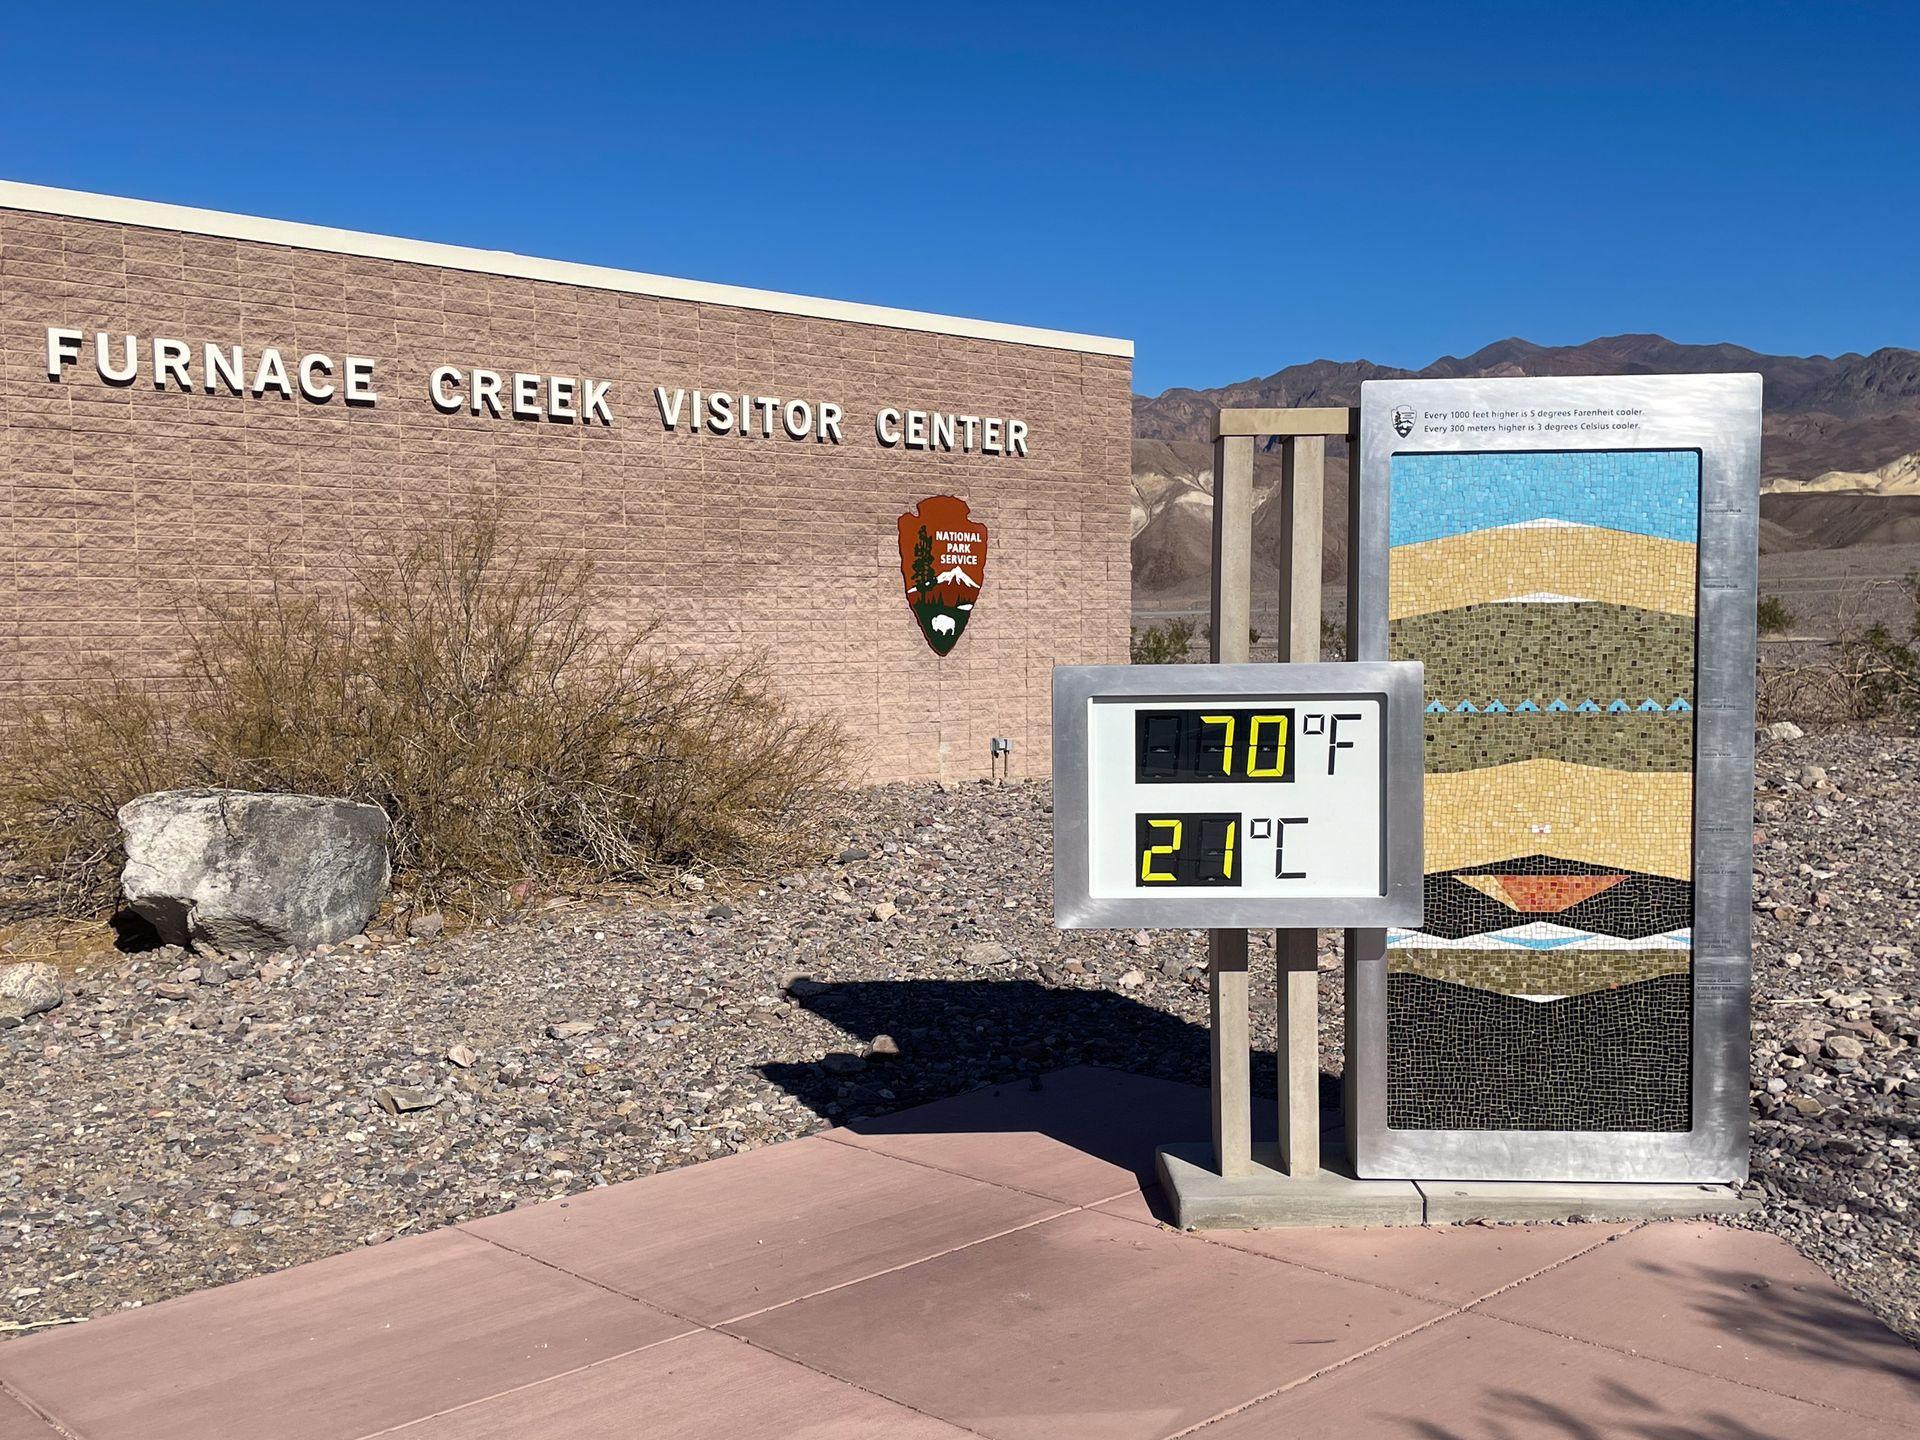 A temperature reading of 70 degrees fahrenheit and 21 degrees celcius outside of the Furnace Creek Visitor Center